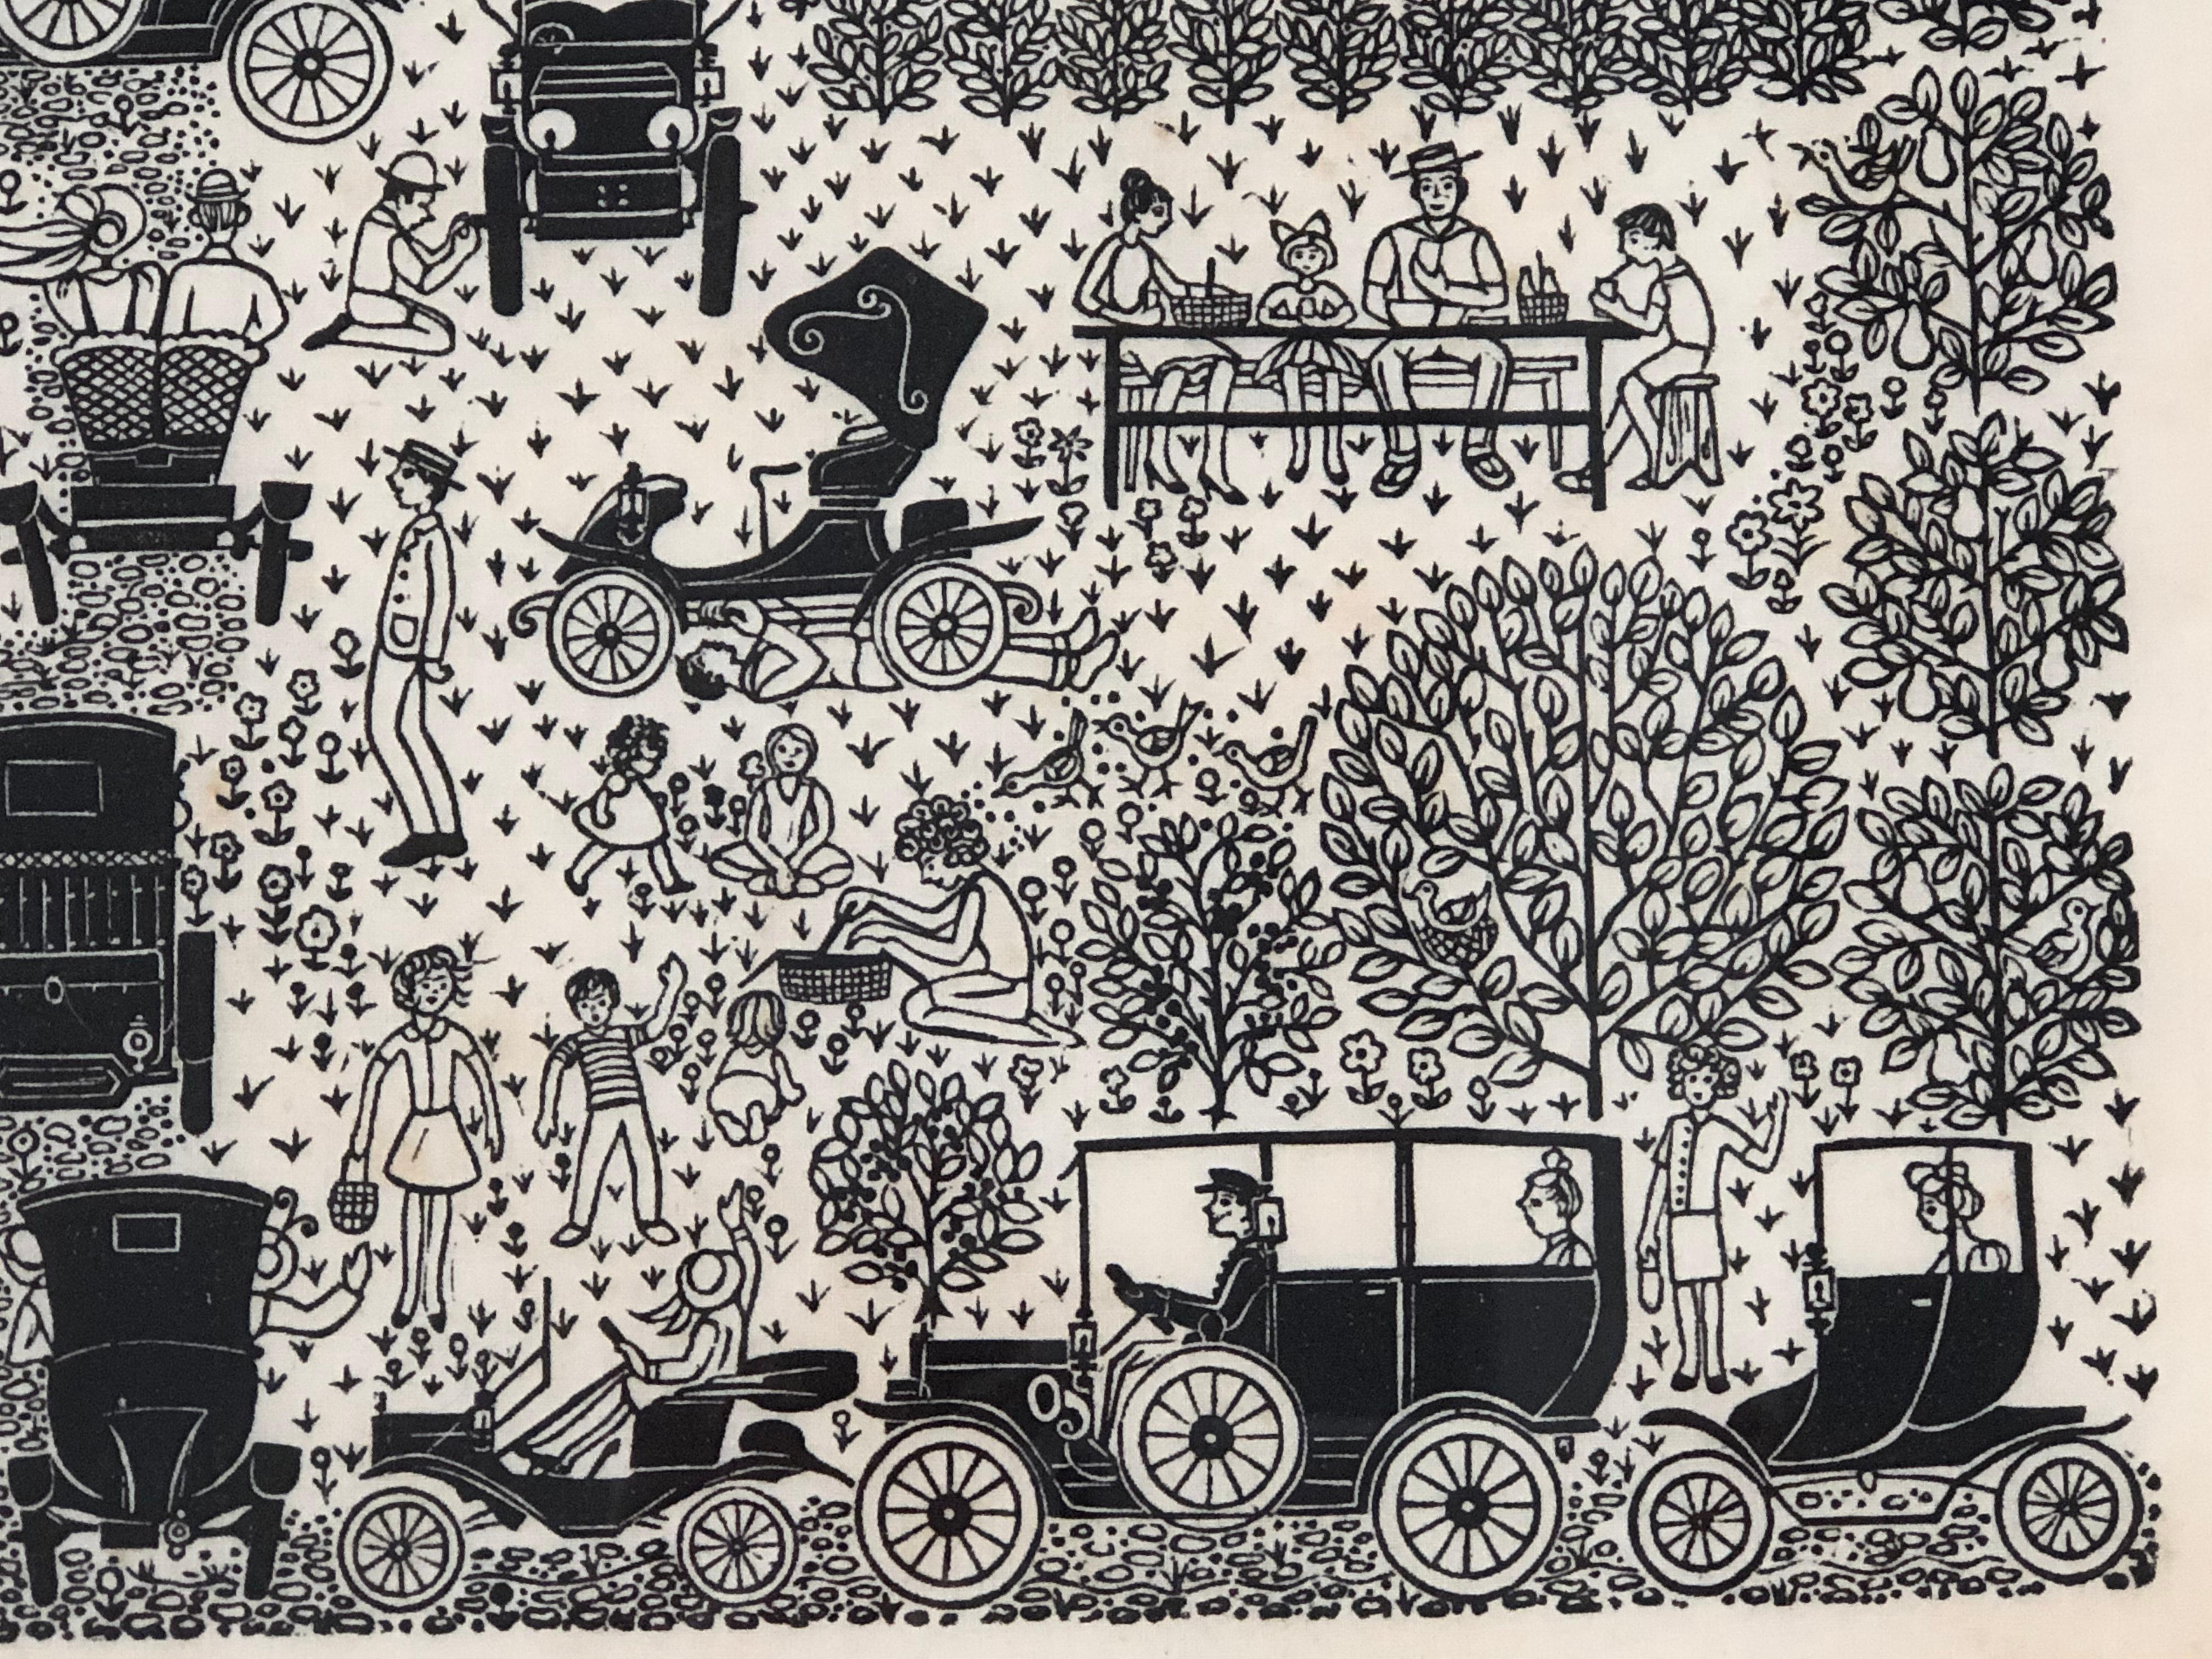 Hand-Crafted Folly Cove Designers Hand Block Printed Textile with Antique Automobiles